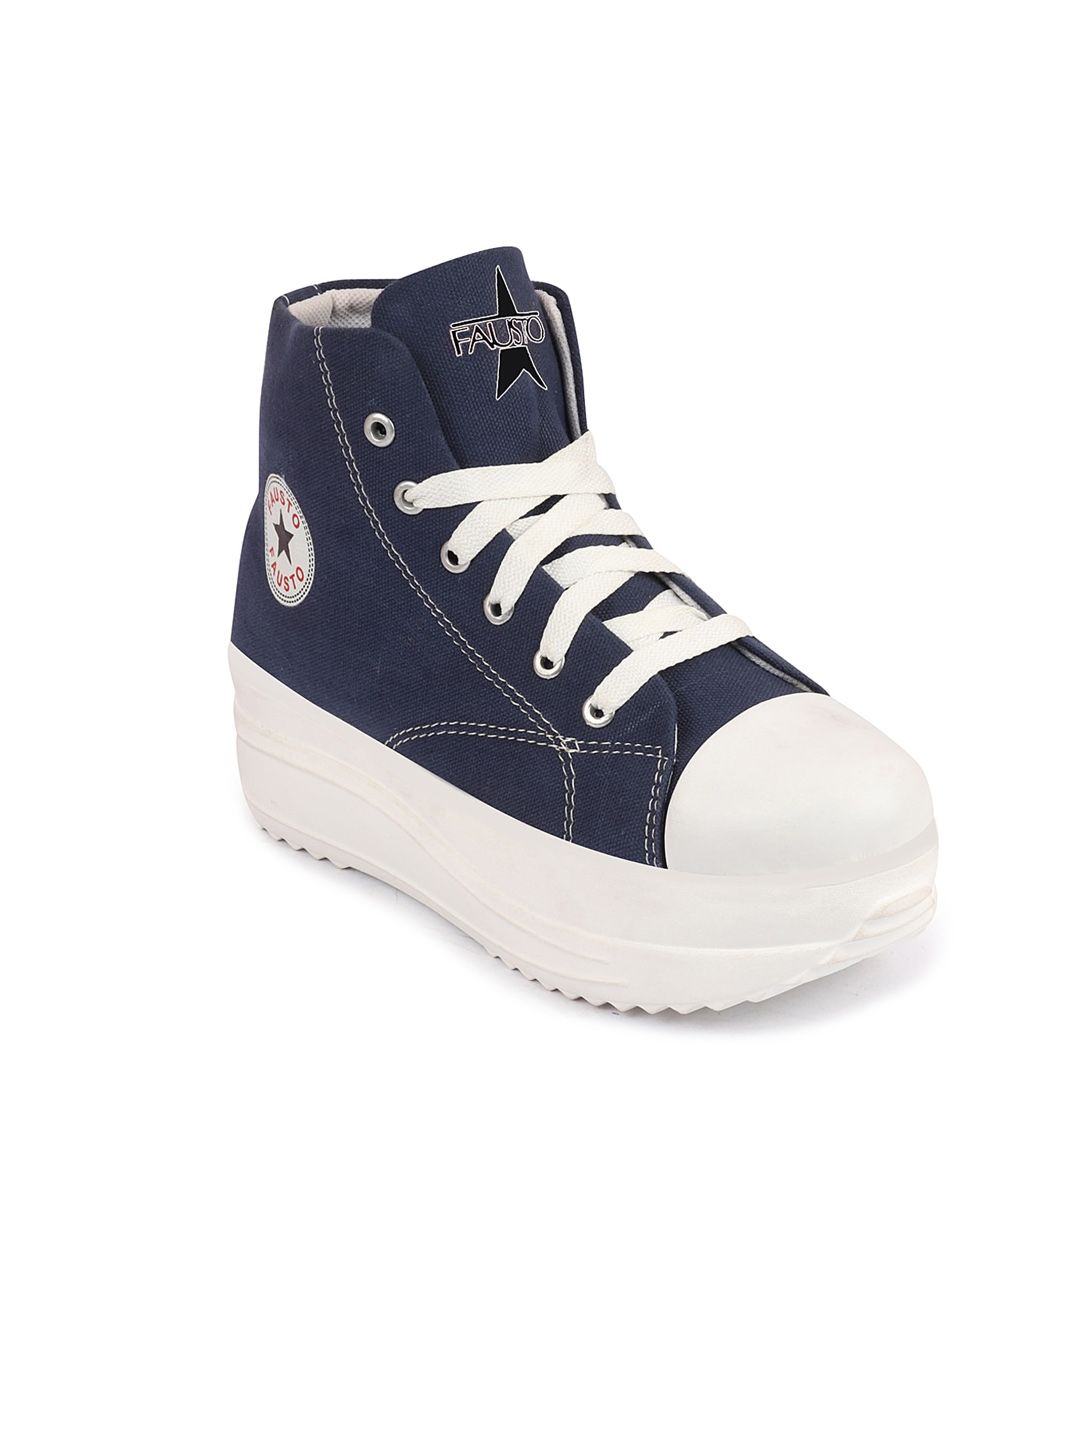 FAUSTO Women Lightweight Mid Top Canvas Sneakers Price in India